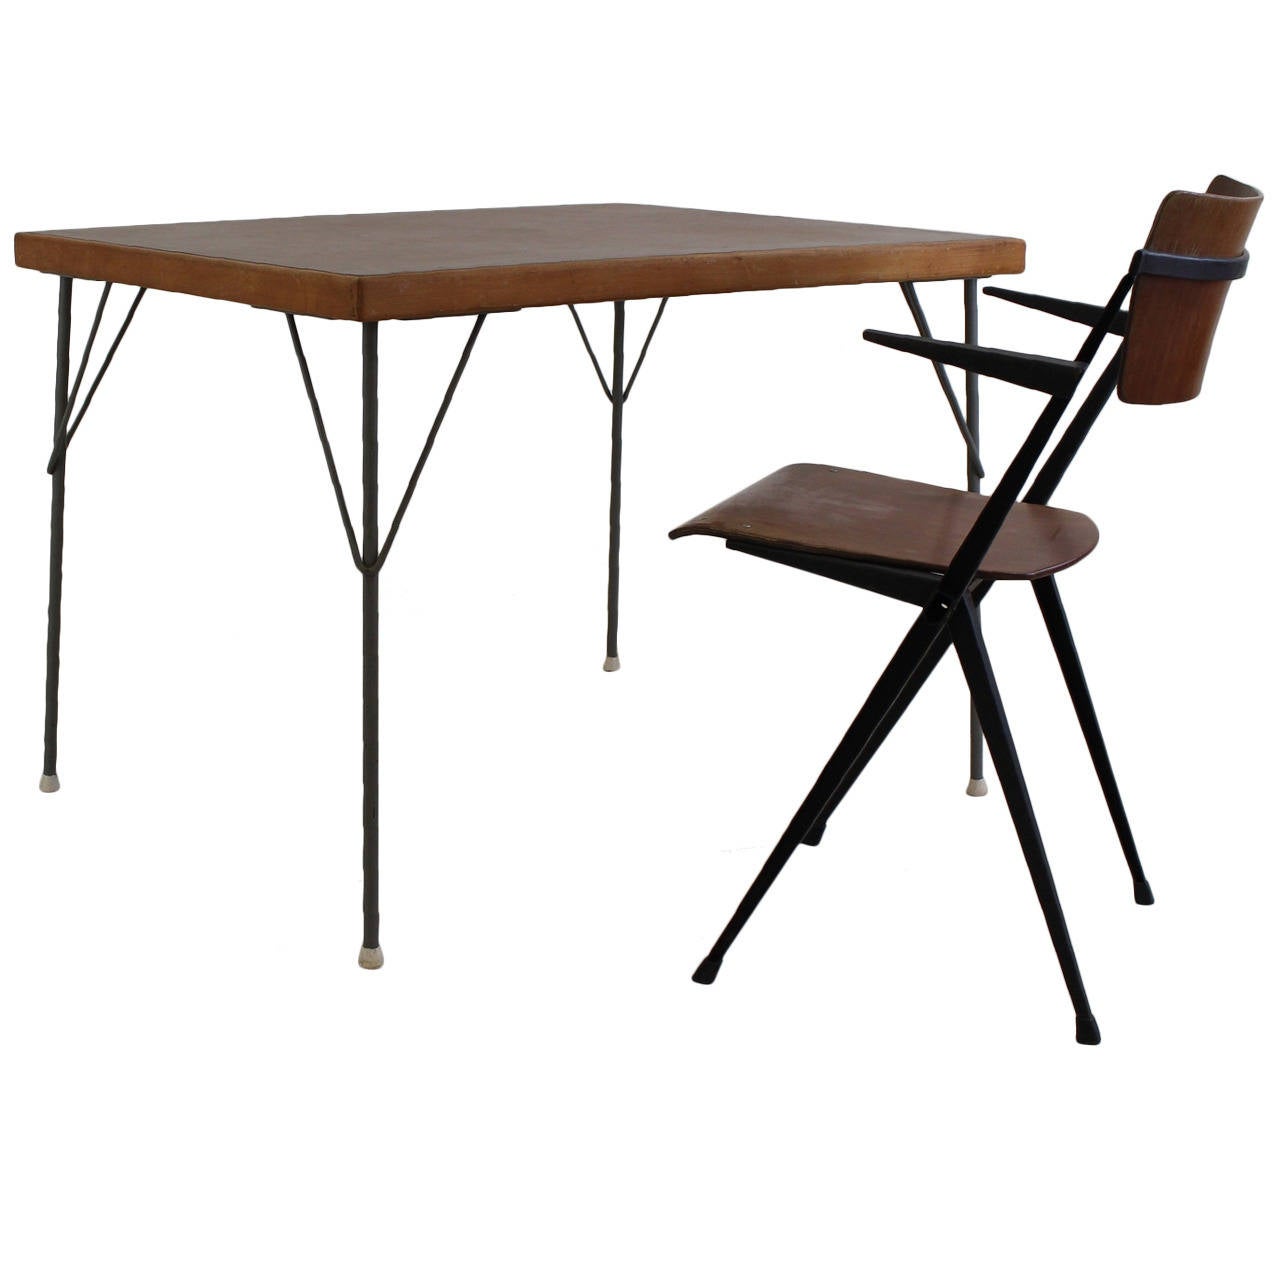 Beautiful Industrial dinner kitchen table. Designer: Wim Rietveld (1958-1959.) Manufacturer: Gispen Holland. Model: 530. This is the original version (later version 3705.).